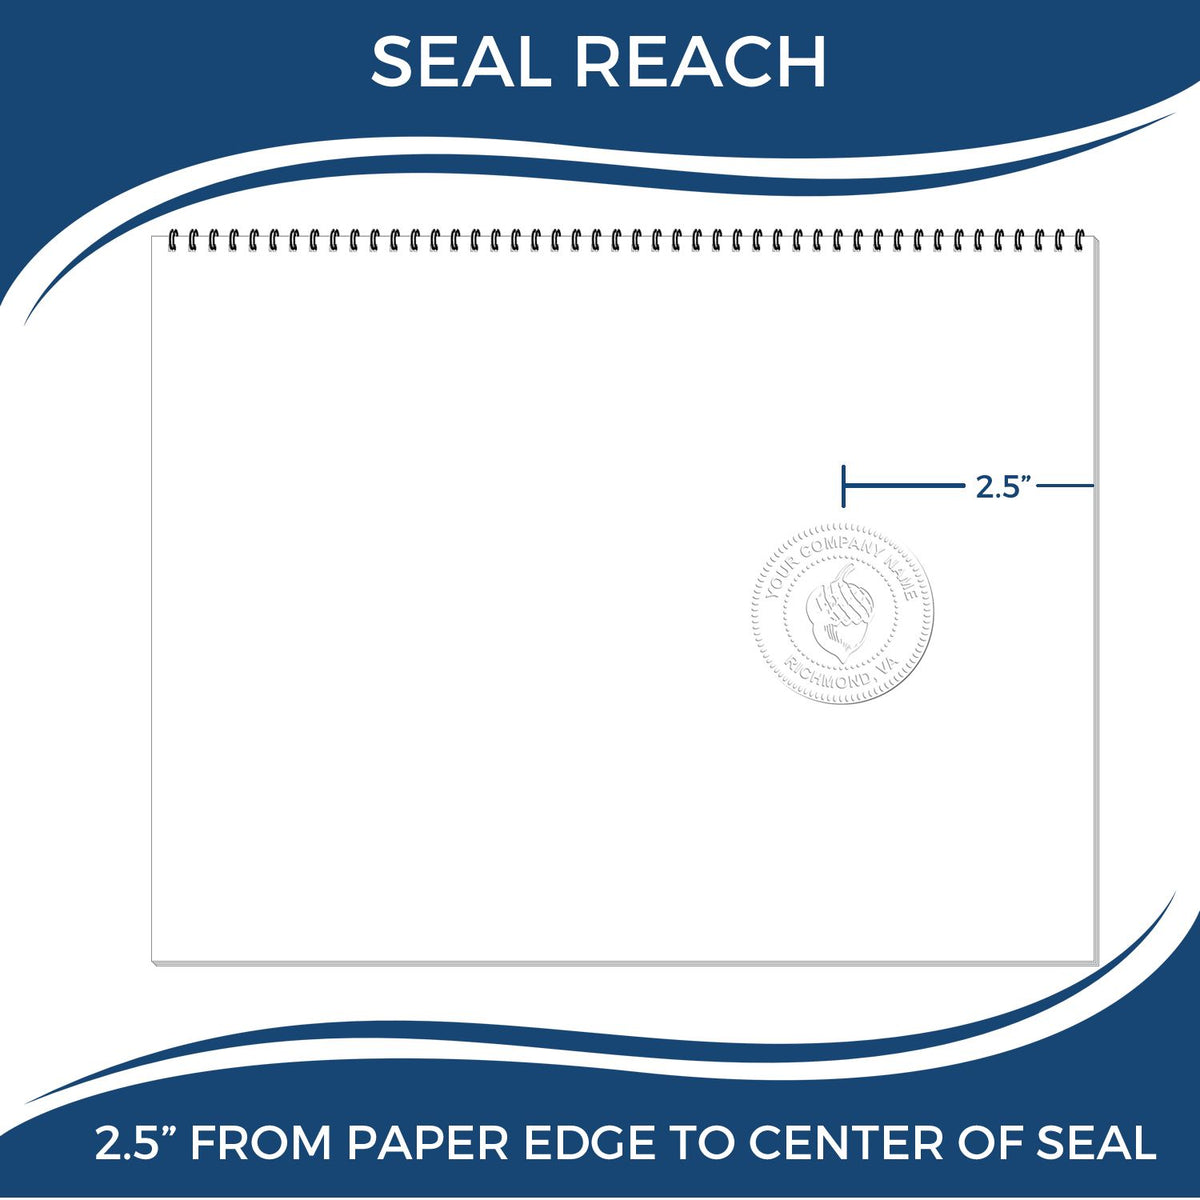 An infographic showing the seal reach which is represented by a ruler and a miniature seal image of the Heavy Duty Cast Iron Ohio Geologist Seal Embosser